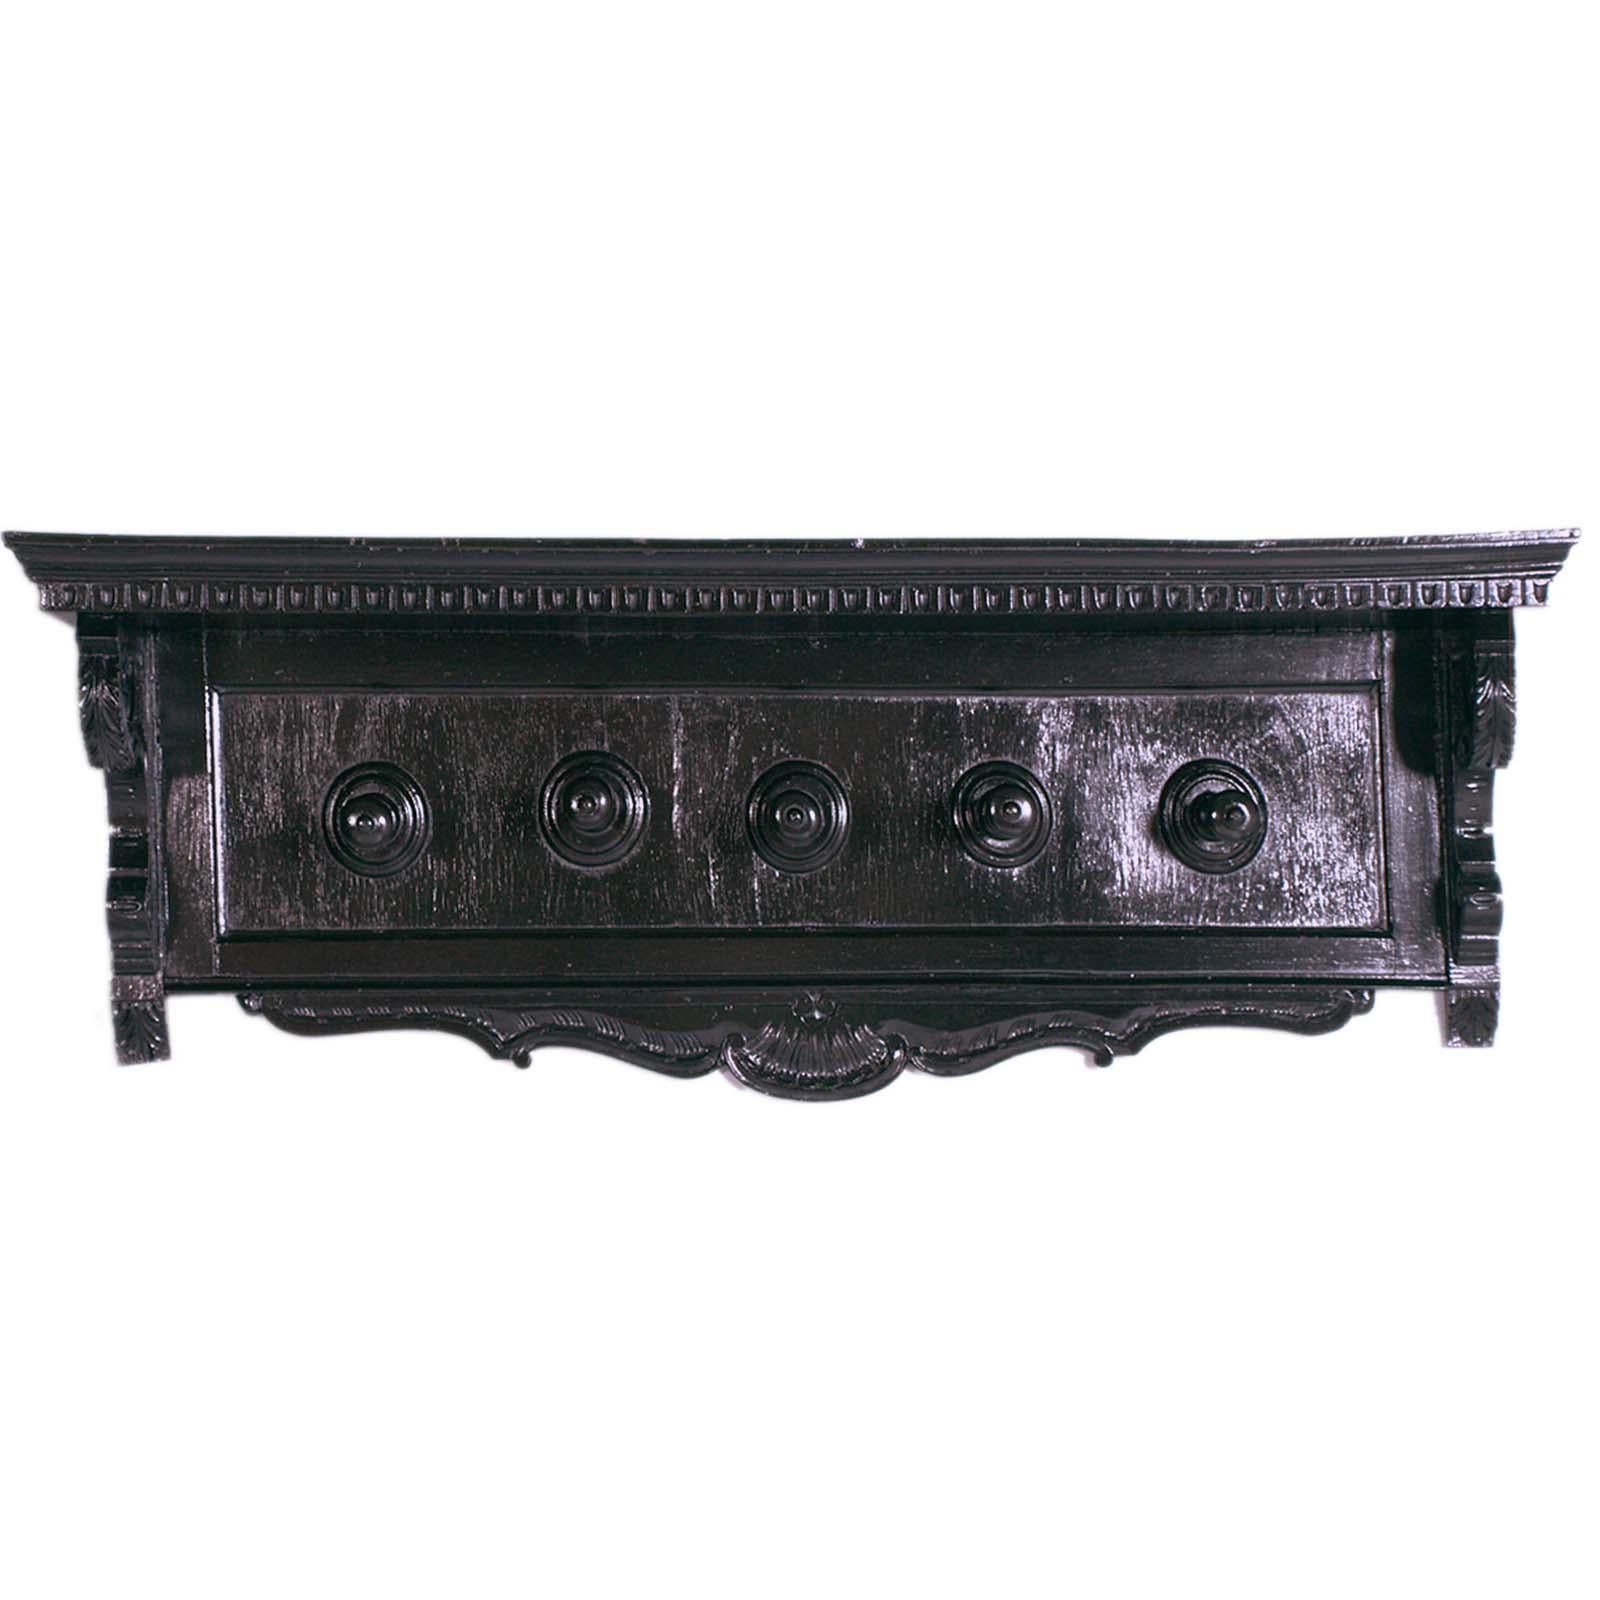 Renaissance coat rack in hand carved ebonized walnut early 1900s, by Dini and Puccini, Cascina, Tuscany, Italy.